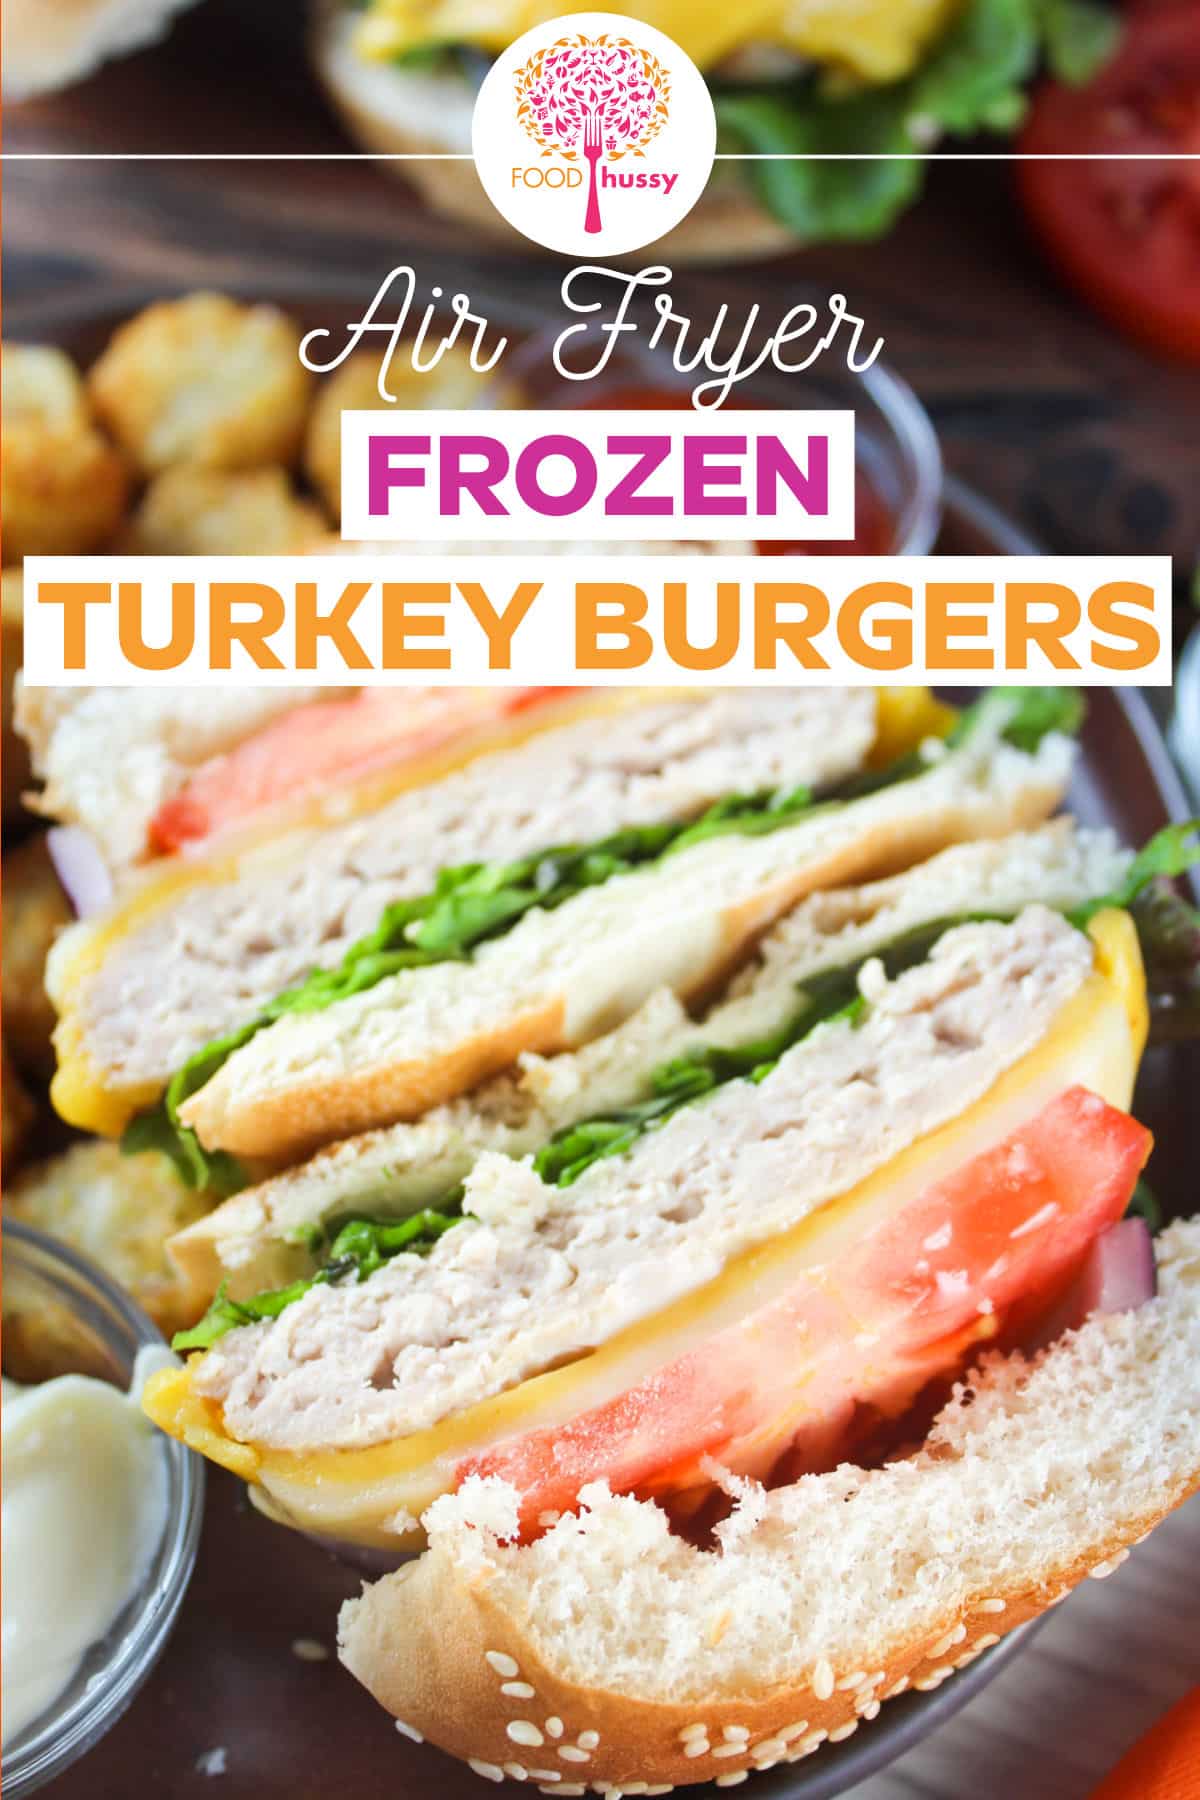 Frozen Turkey Burgers in the air fryer are a fast and healthy dinner any night of the week! No need to preheat the air fryer or thaw the burgers - just in the air fryer and go! via @foodhussy